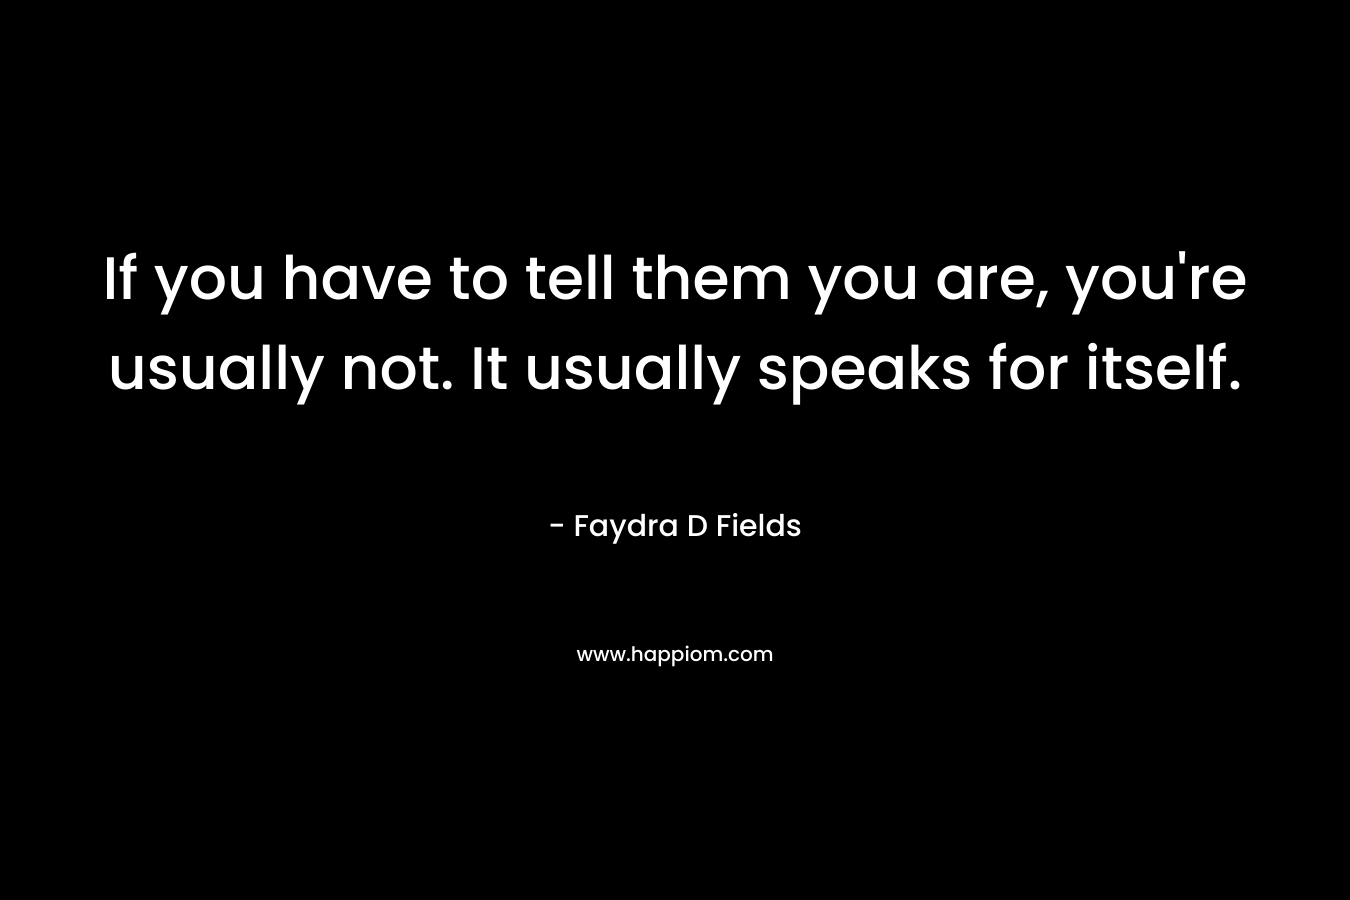 If you have to tell them you are, you’re usually not. It usually speaks for itself. – Faydra D Fields